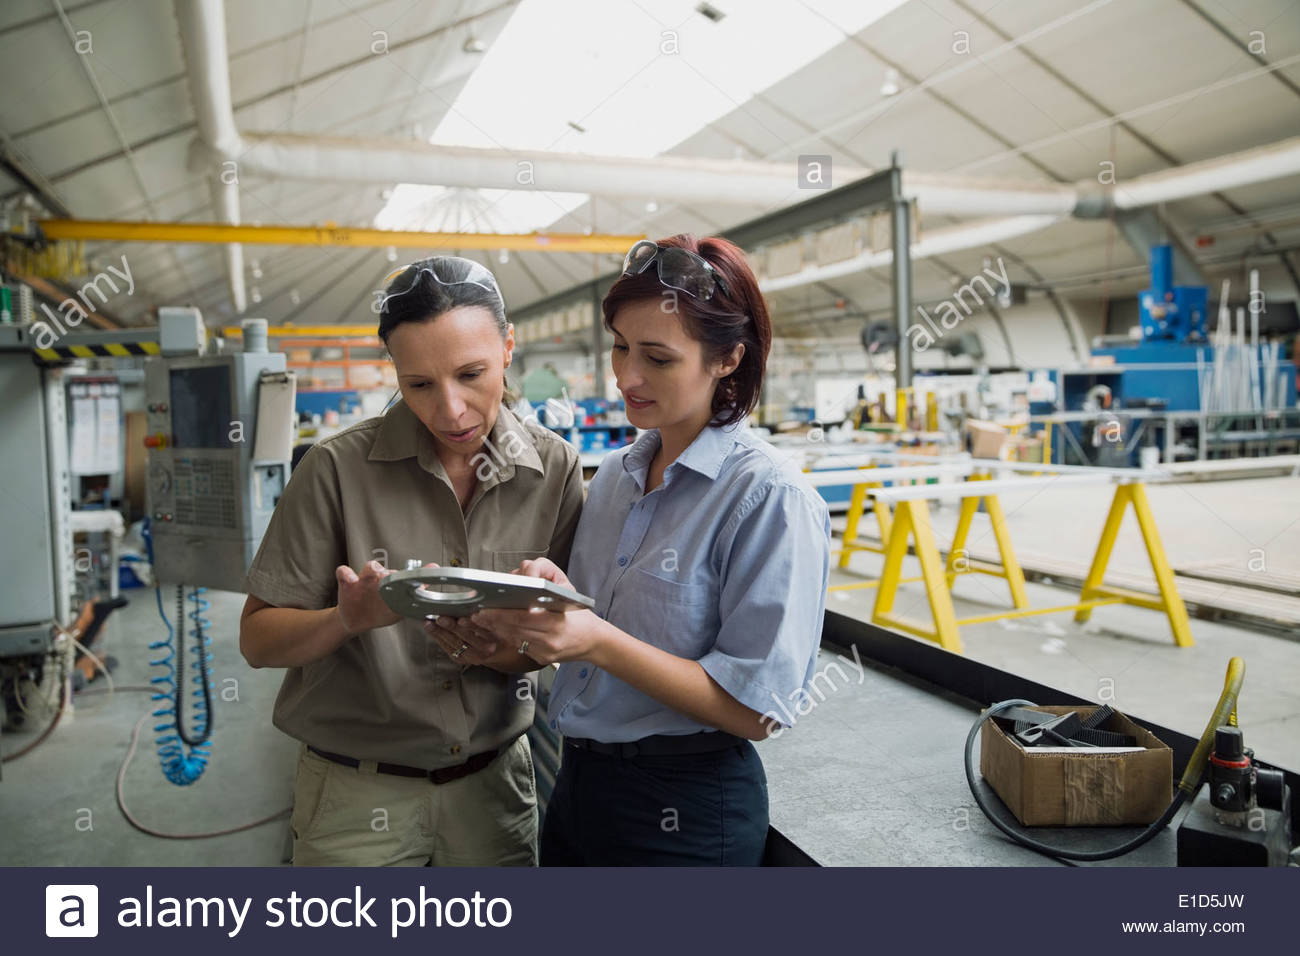 Workers examining metal part in manufacturing plant Stock Photo